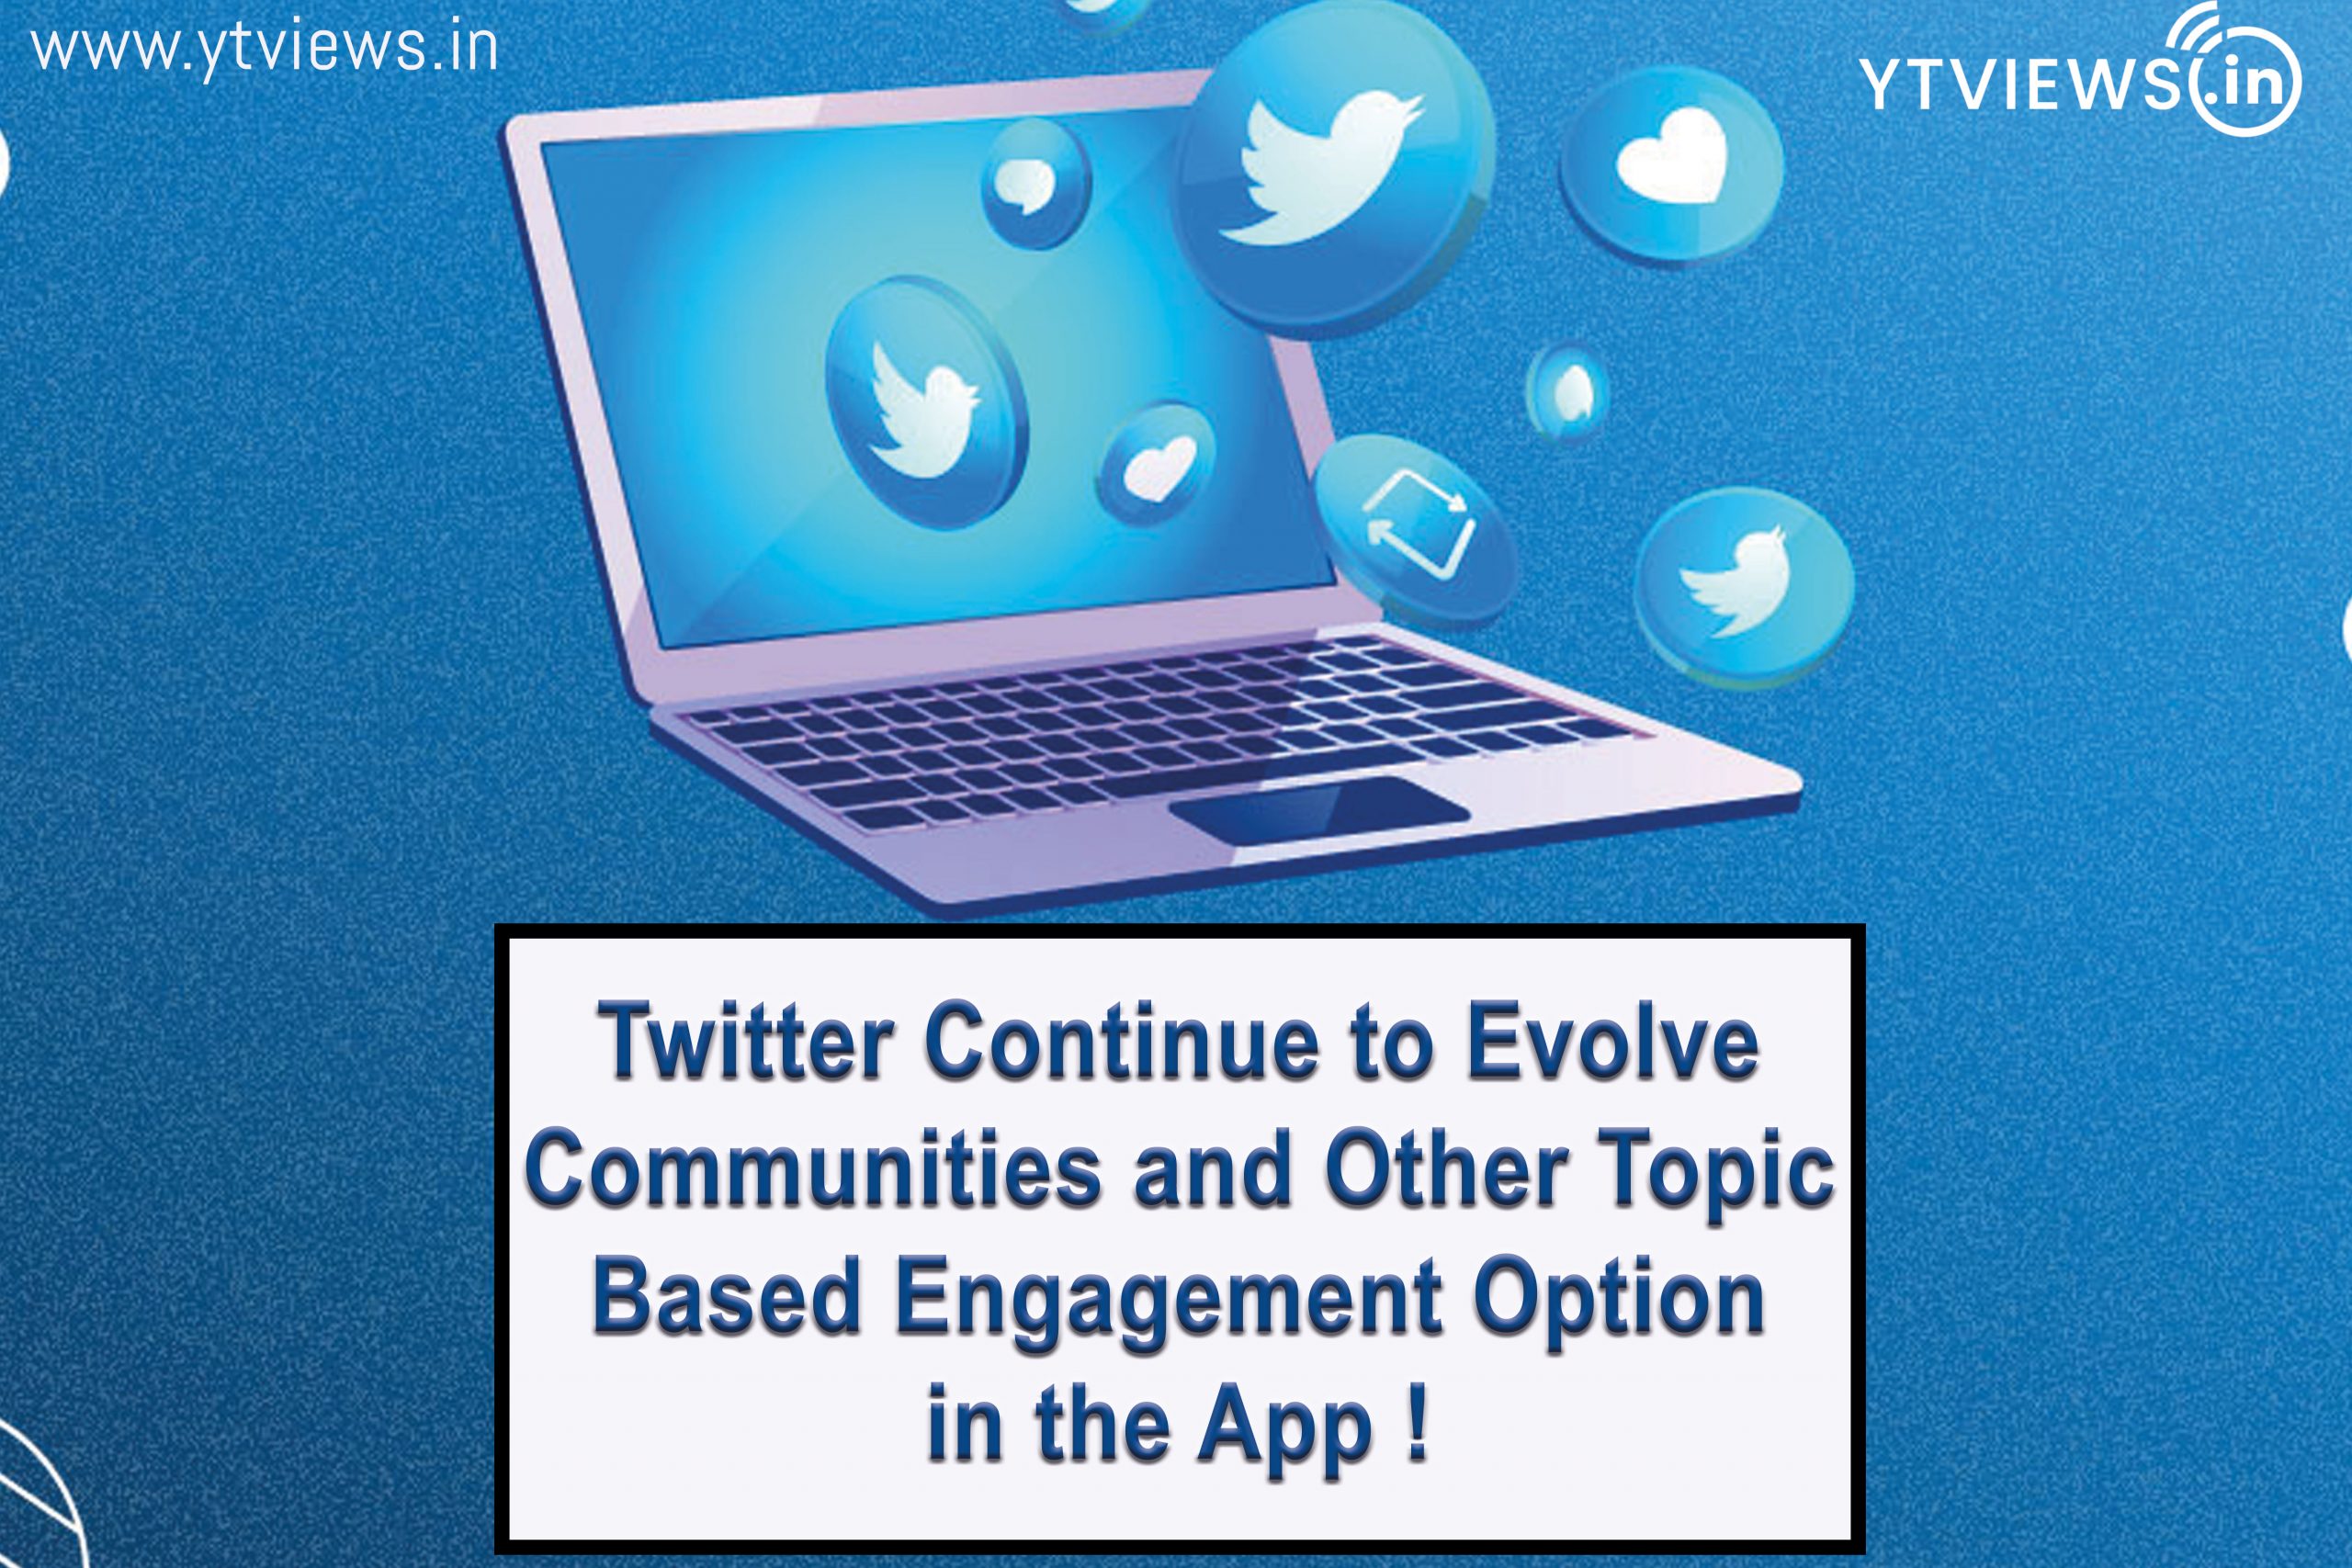 Twitter continues to evolve communities and other topic-based engagement options in the app